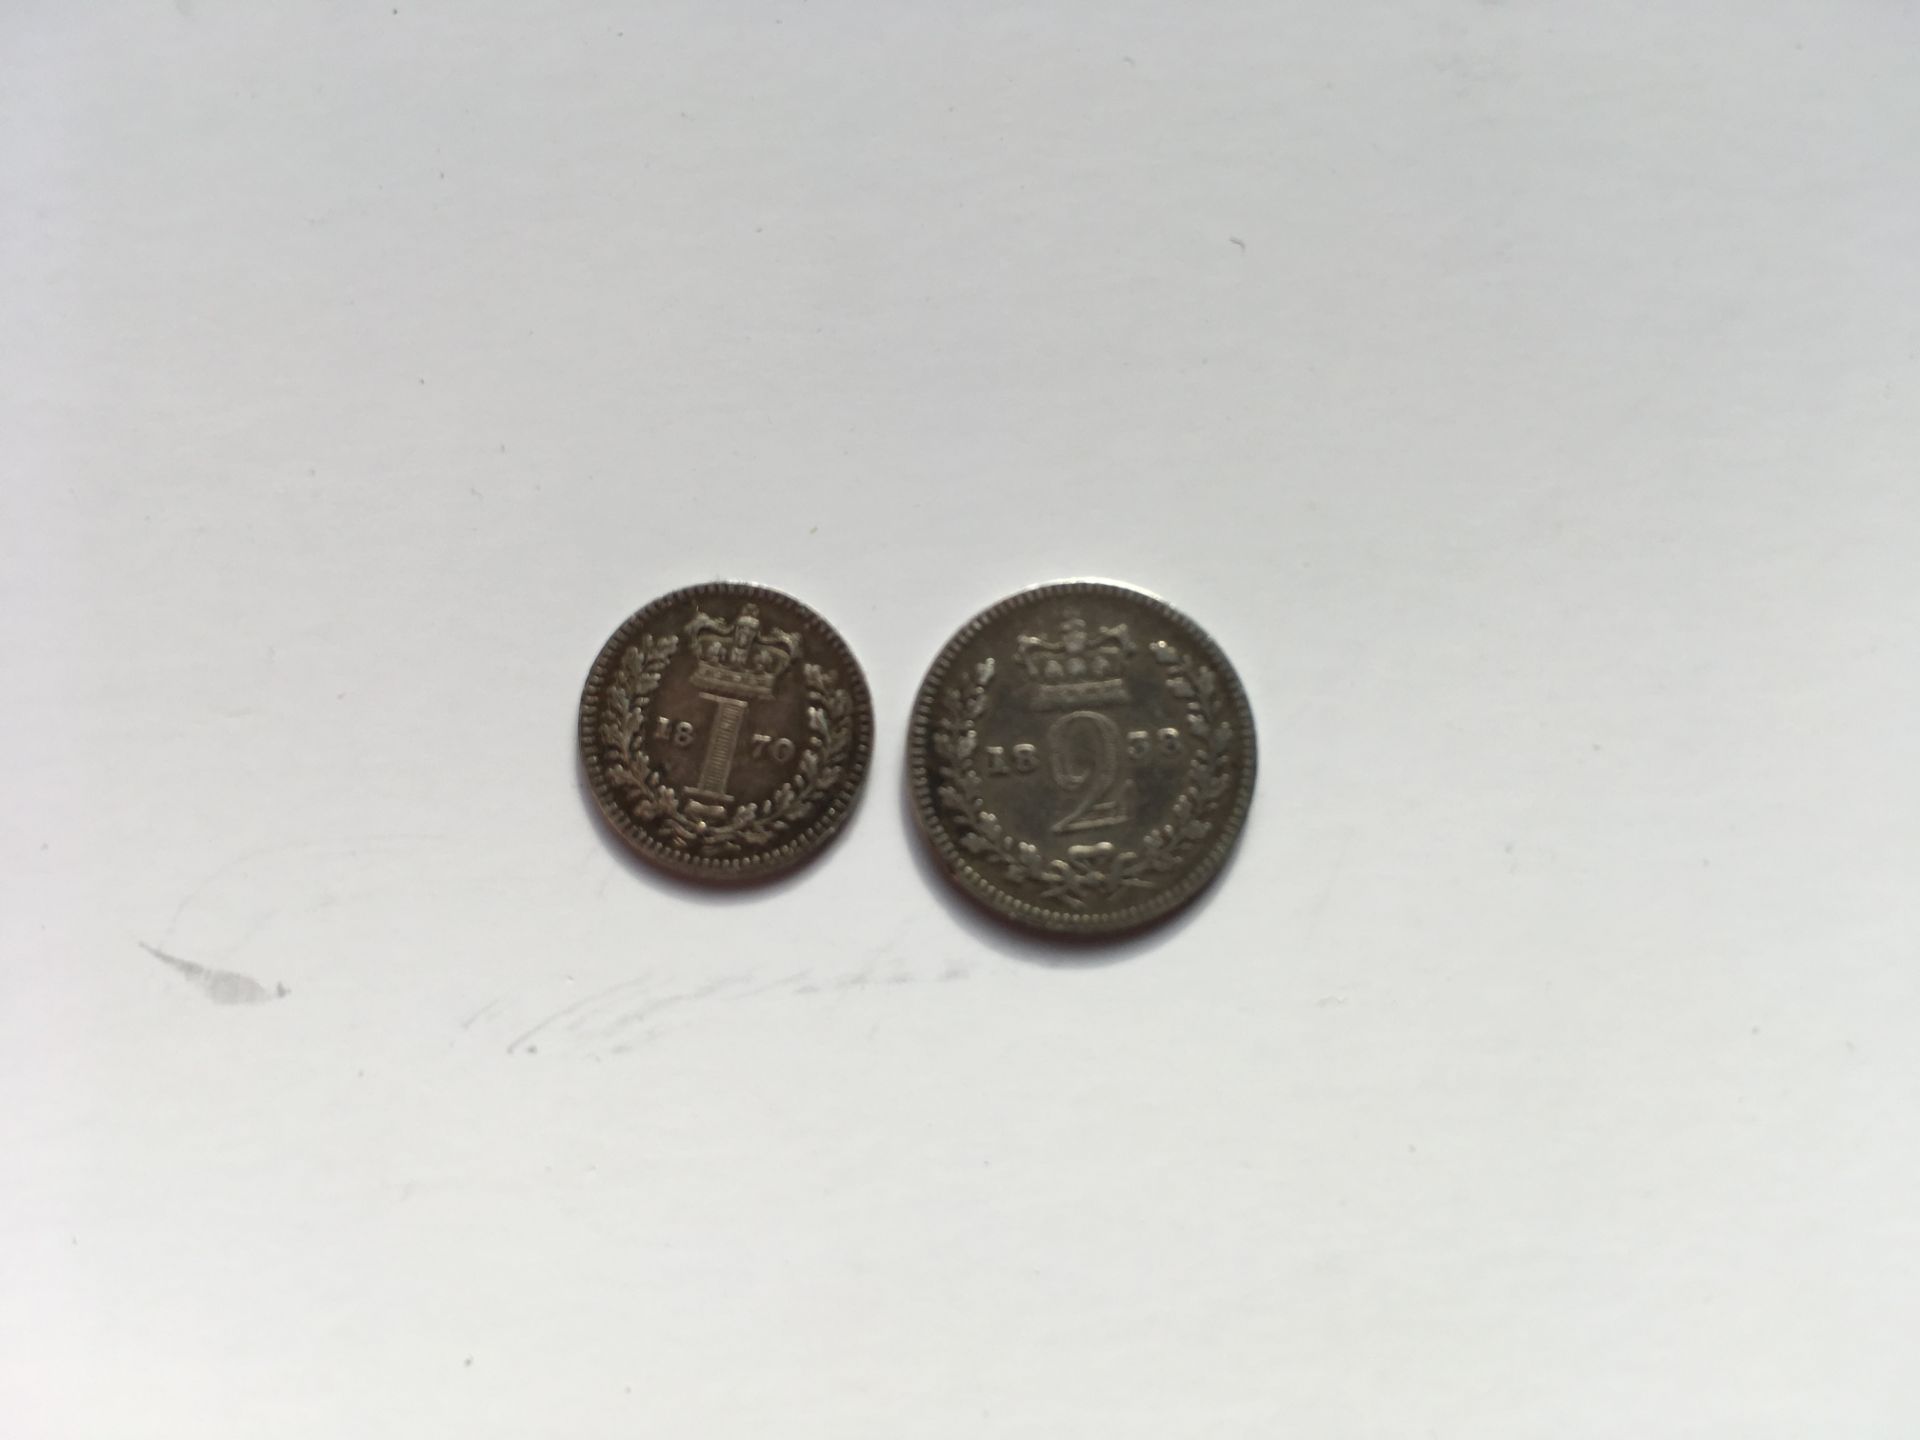 COINS: GB MAUNDY PENNY 1870 AND TWO PENCE 1838. - Image 2 of 8